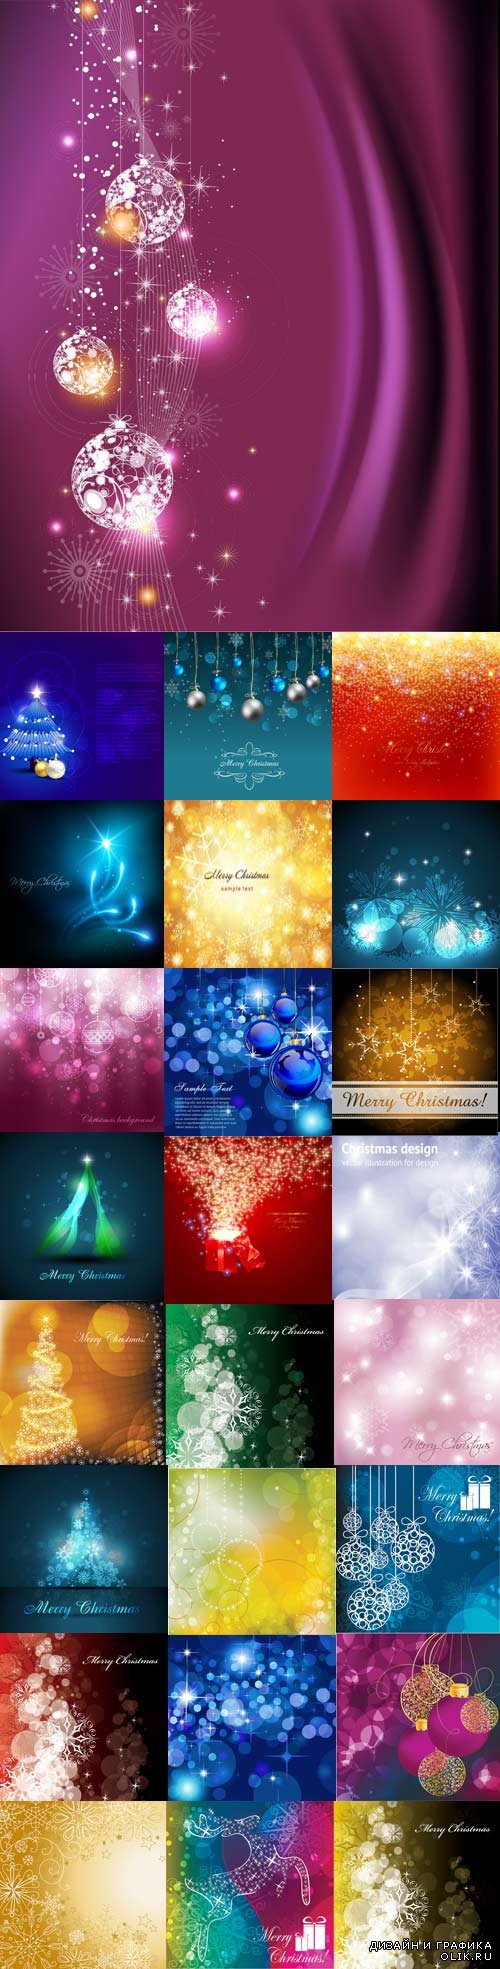 Beautiful New Year's vector backgrounds